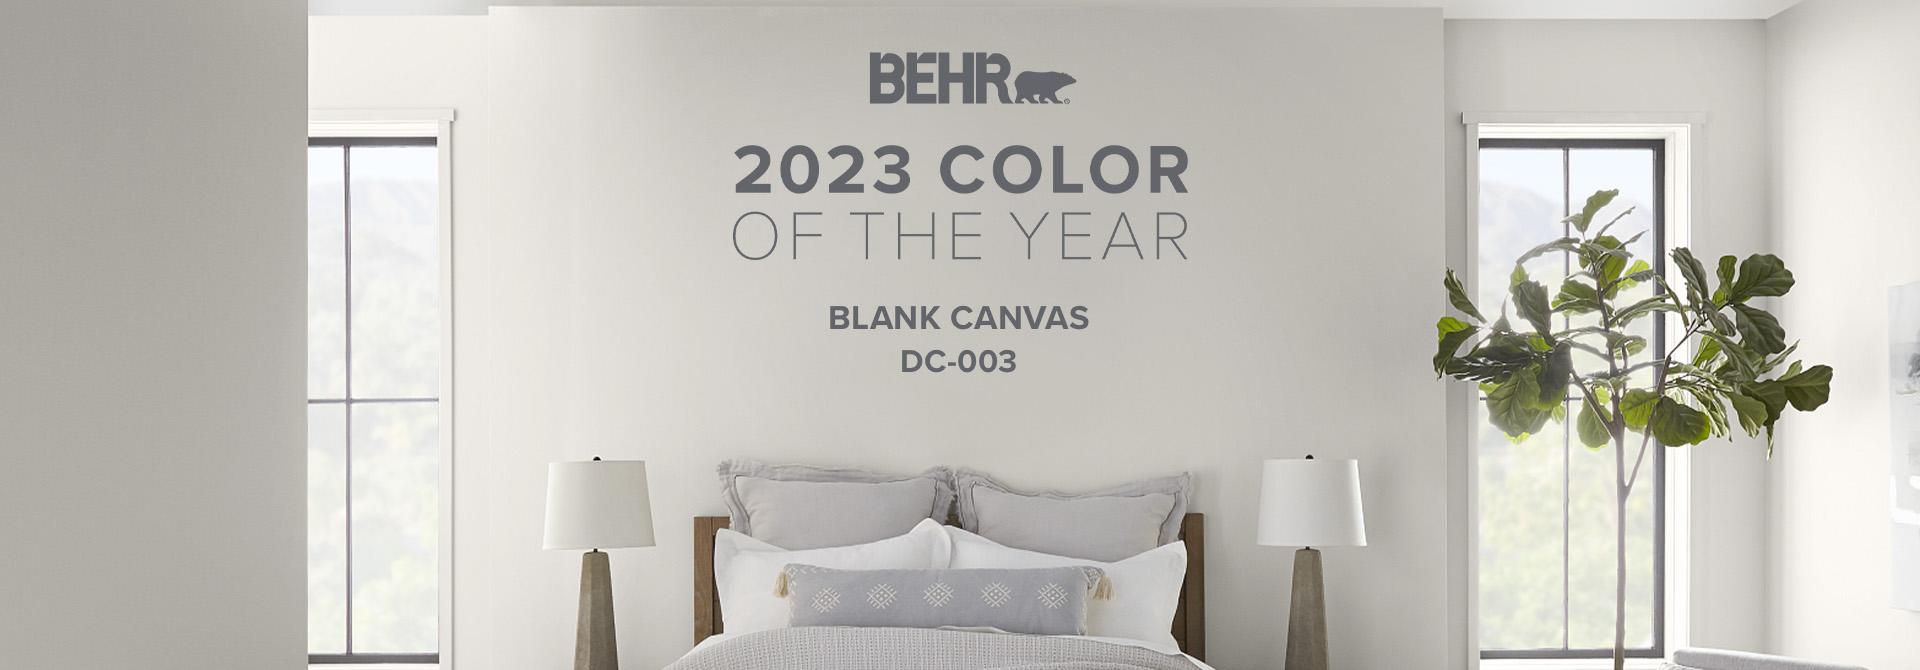 Bedroom painted in Blank Canvas, featuring Behr 2023 Color of the Year, Blank Canvas